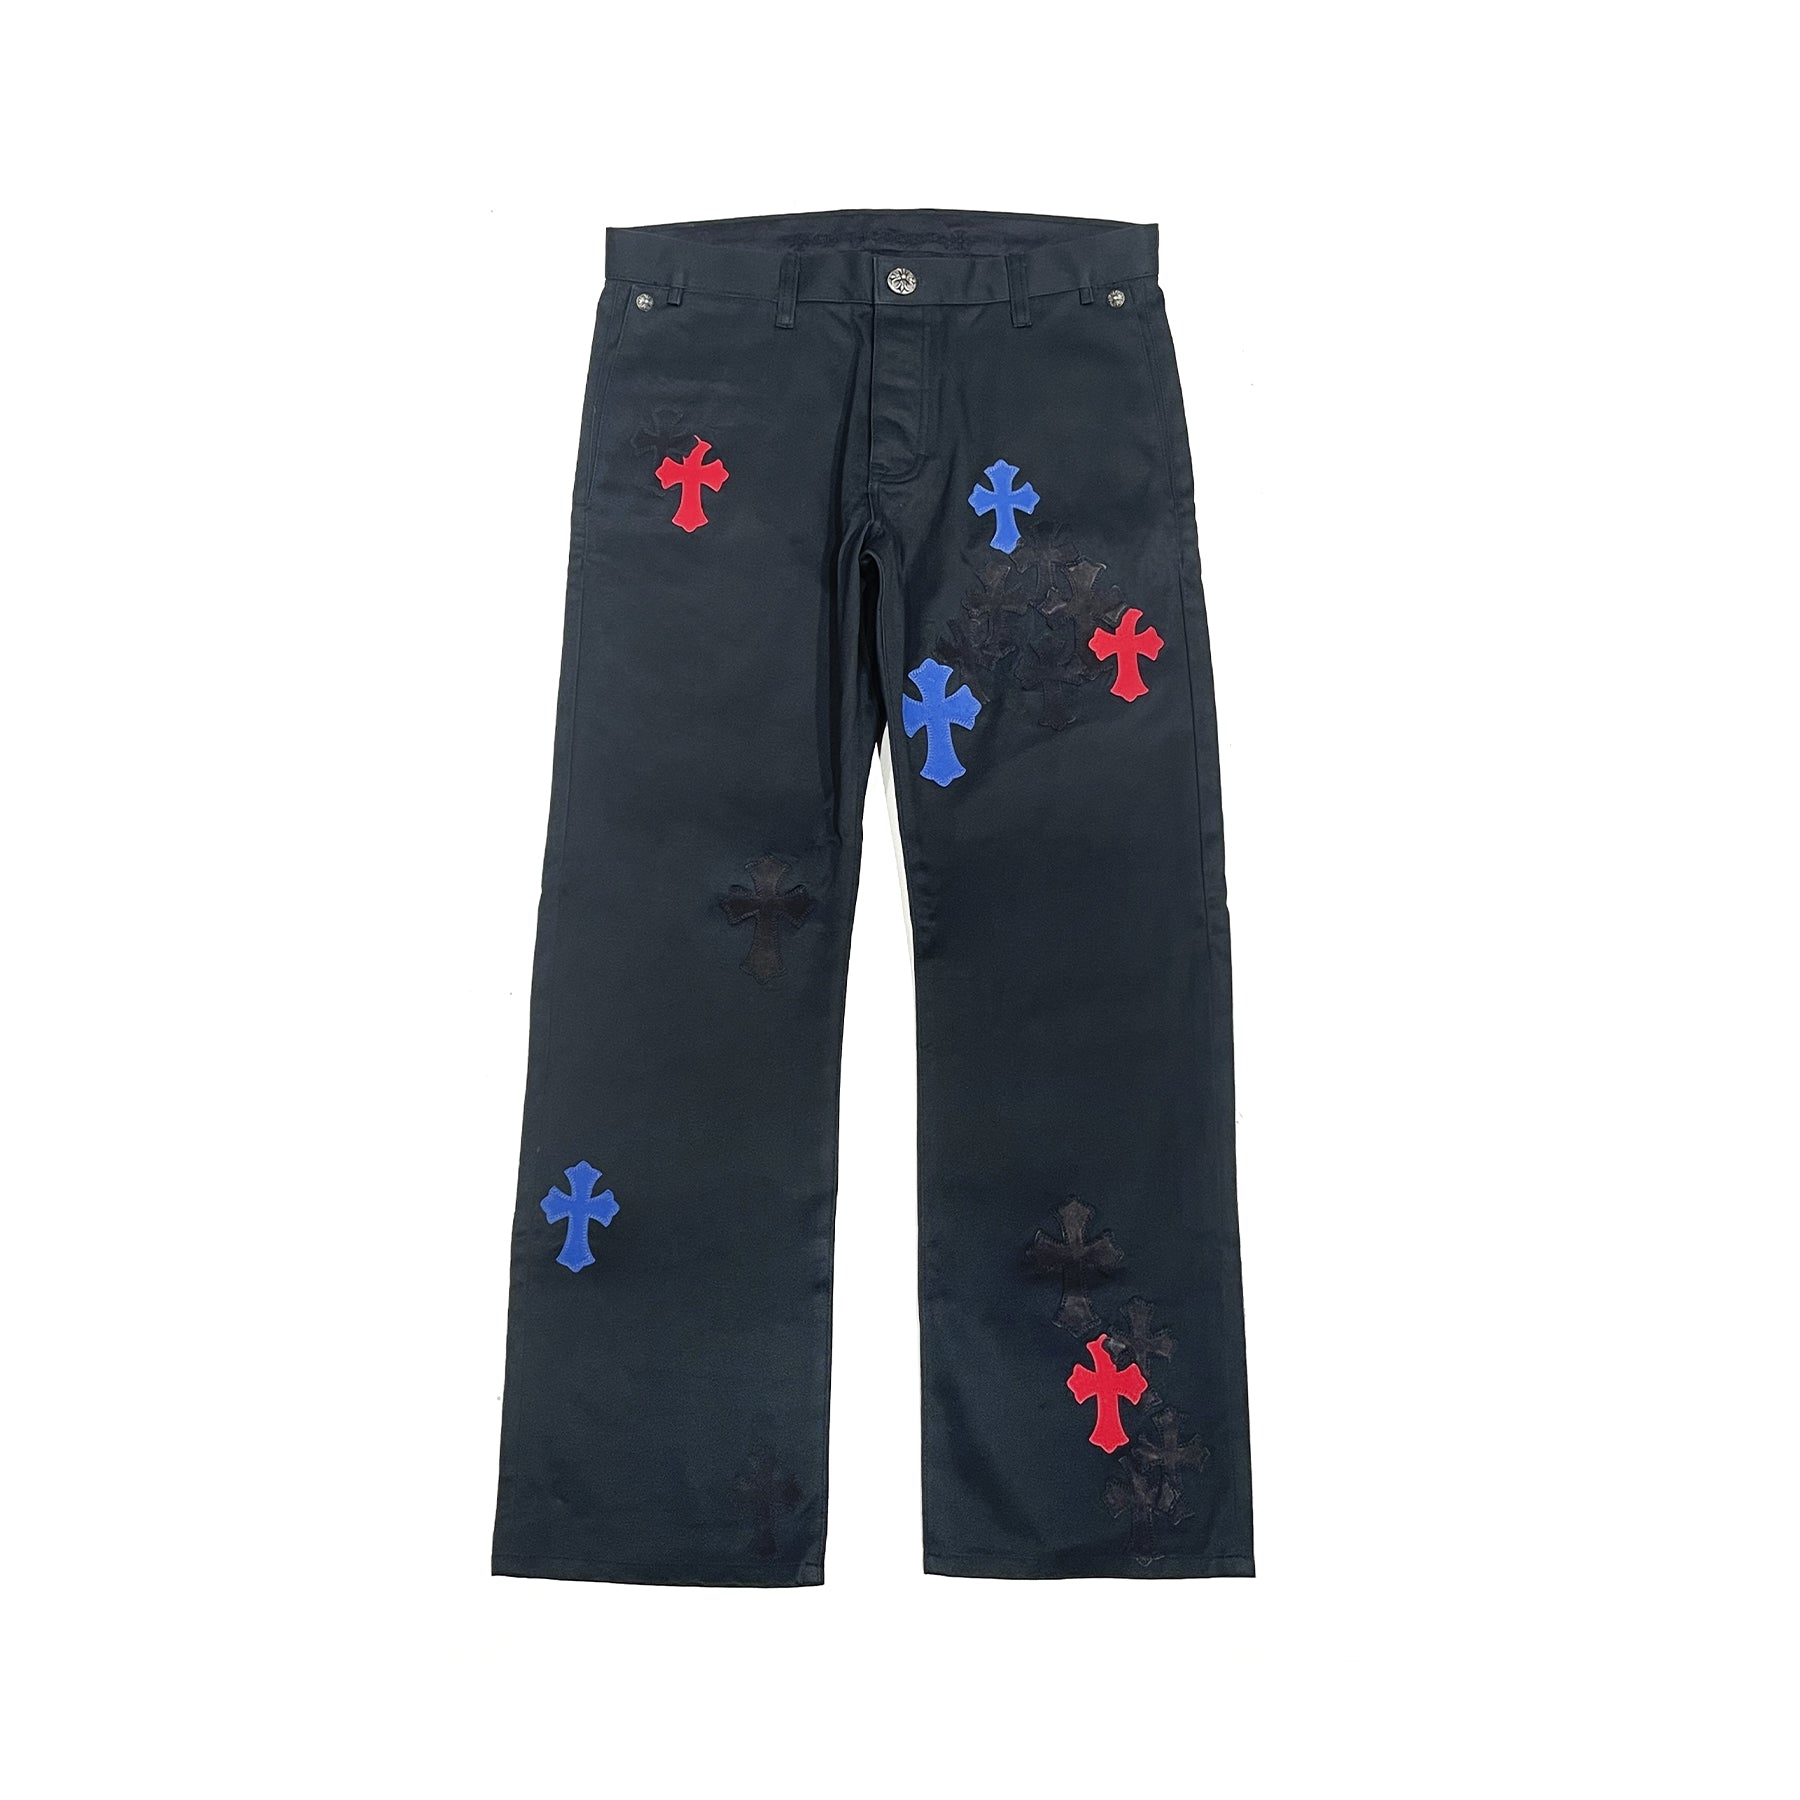 Chrome Hearts Red and Black Patched Chrome Hearts Jeans